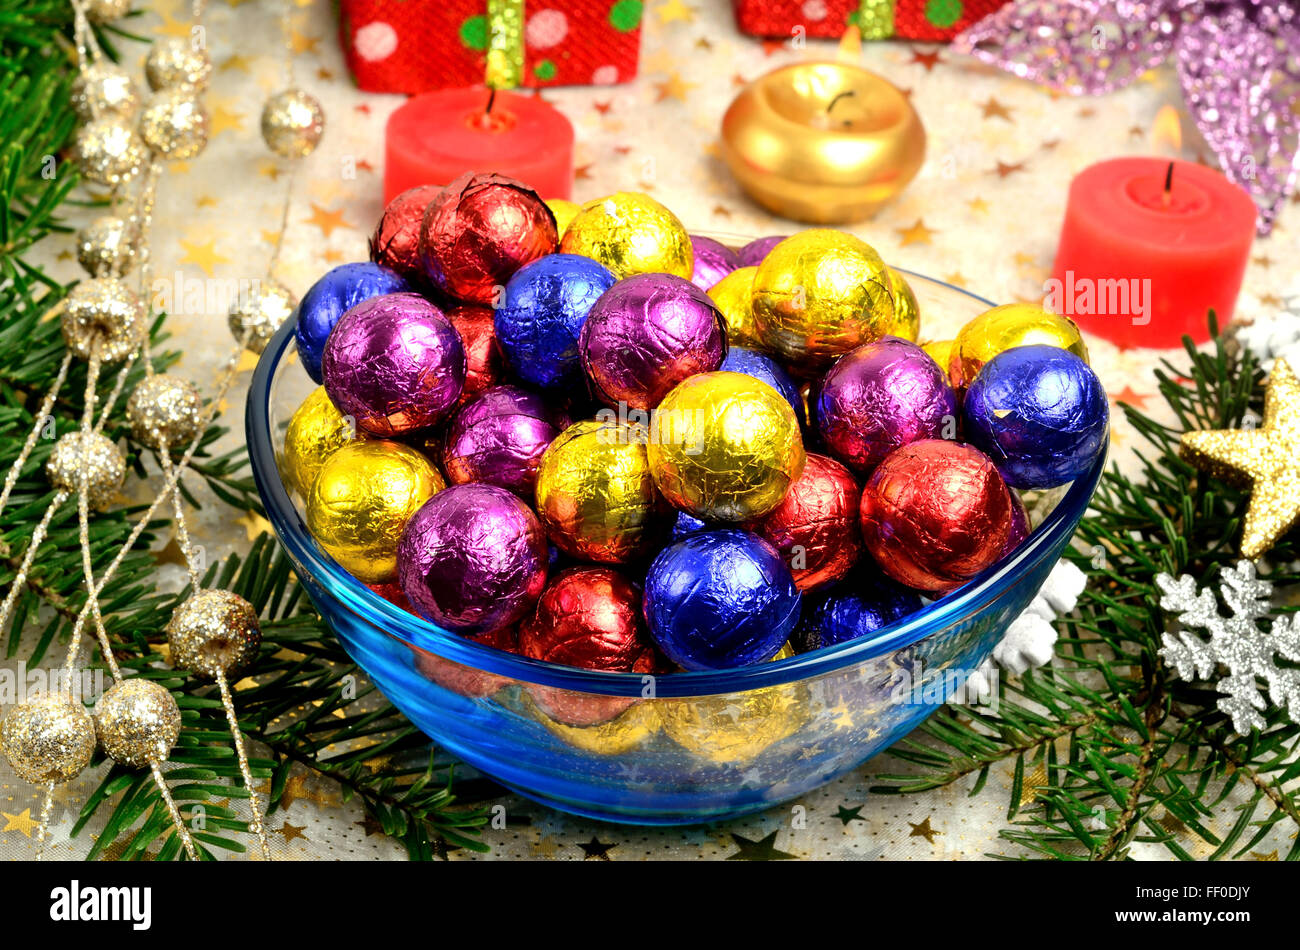 Bowl with colorful chocolate with christmas decoration Stock Photo